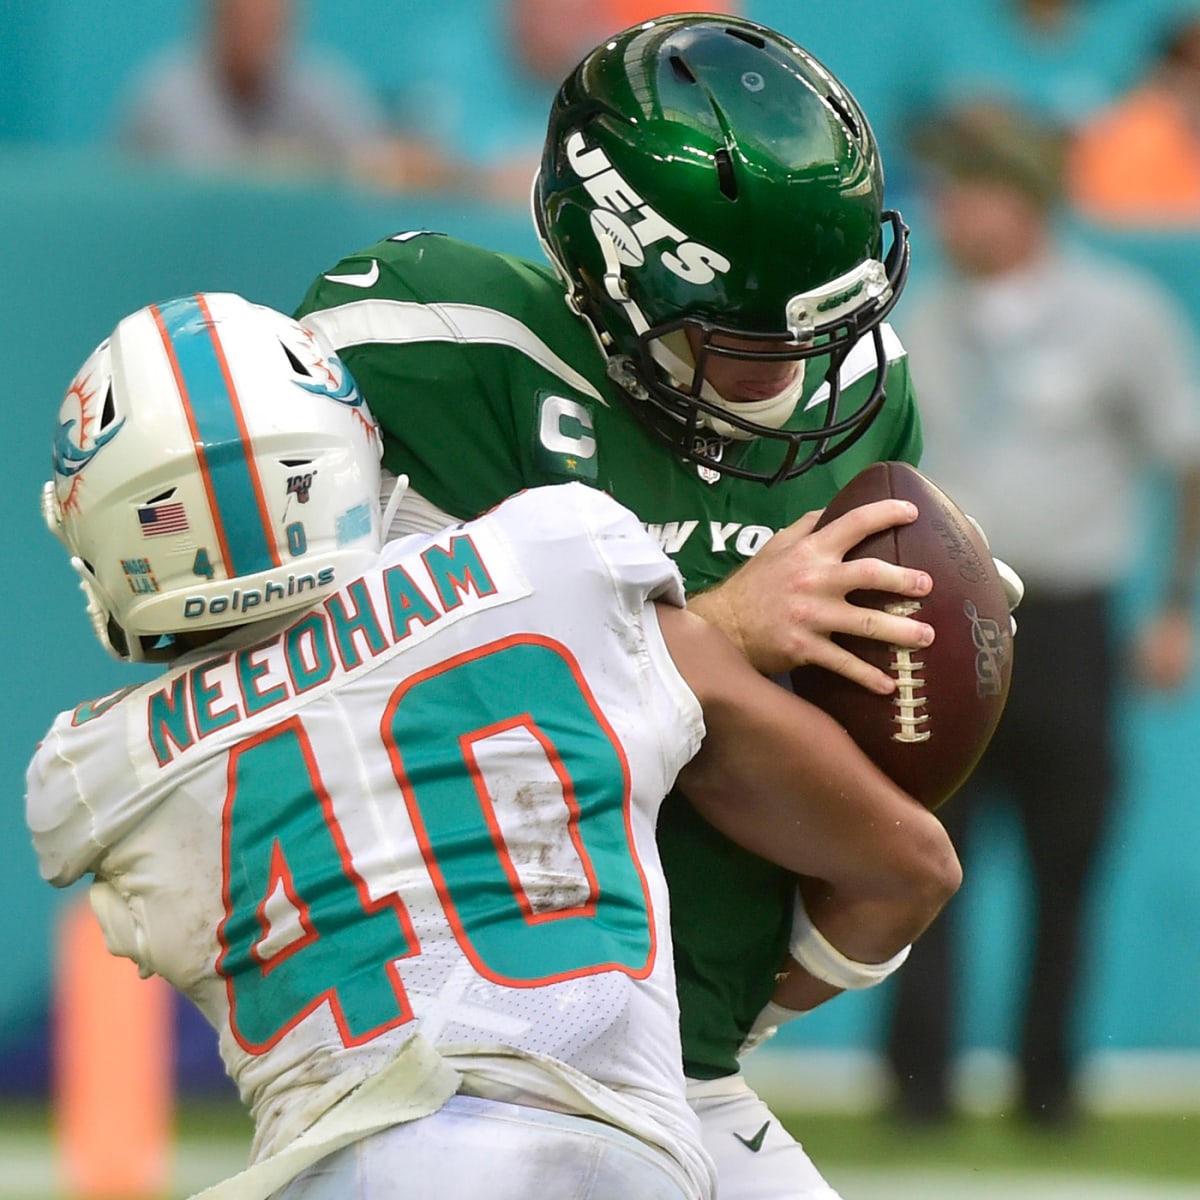 New York Jets lose disgusting game to Dolphins to end the season